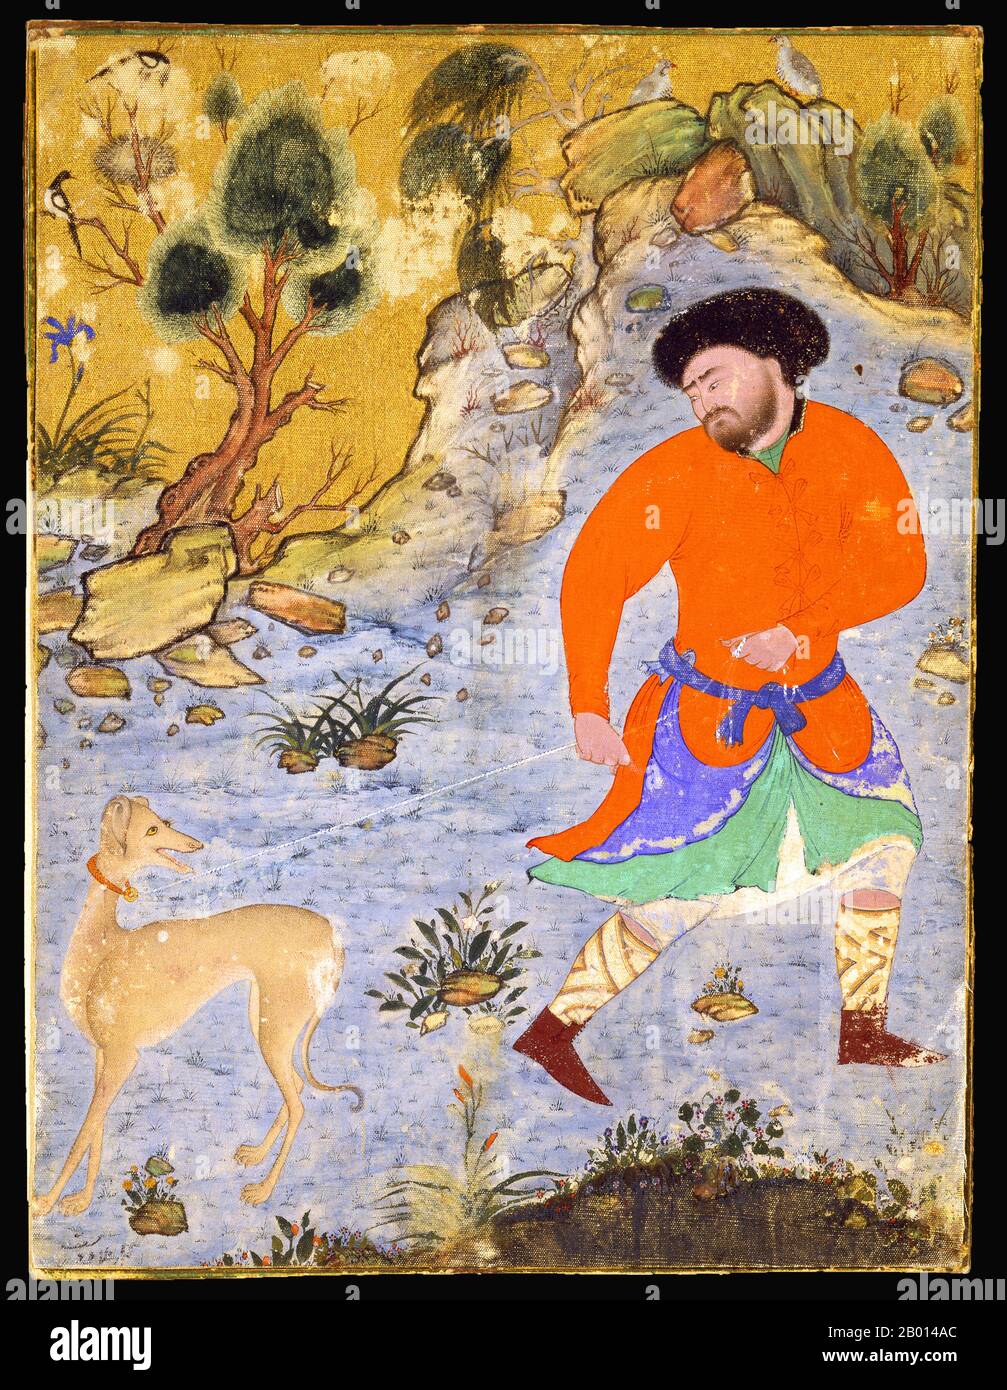 Iran: A man with an apparently recalcitrant Saluki hunting dog on a leash. Miniature painting on cloth by Sheyk Muhammad, mid-16th century. Stock Photo